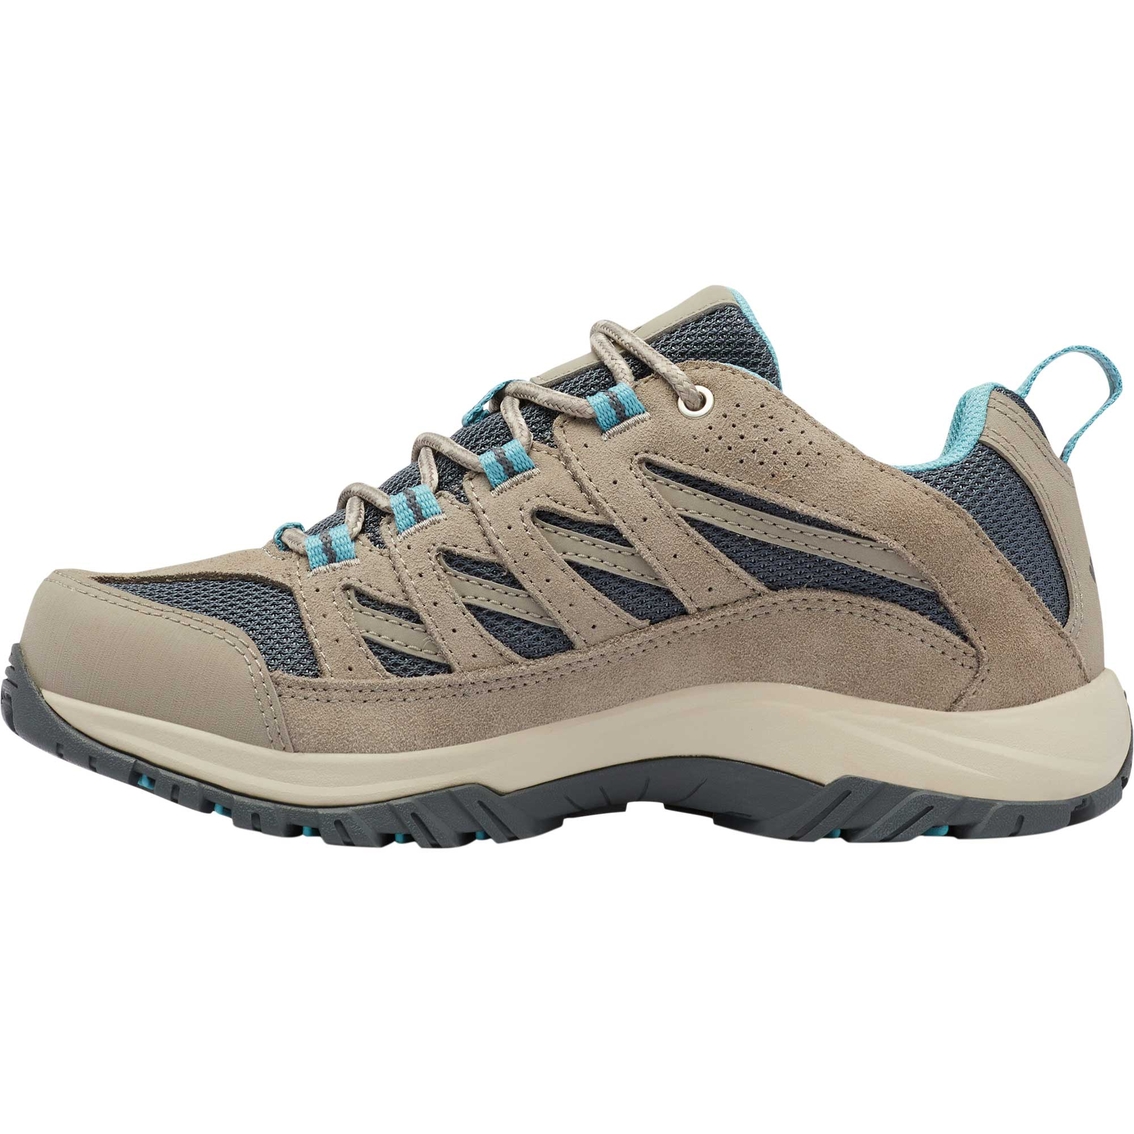 Columbia Women's Crestwood Hiking Boots - Image 3 of 9